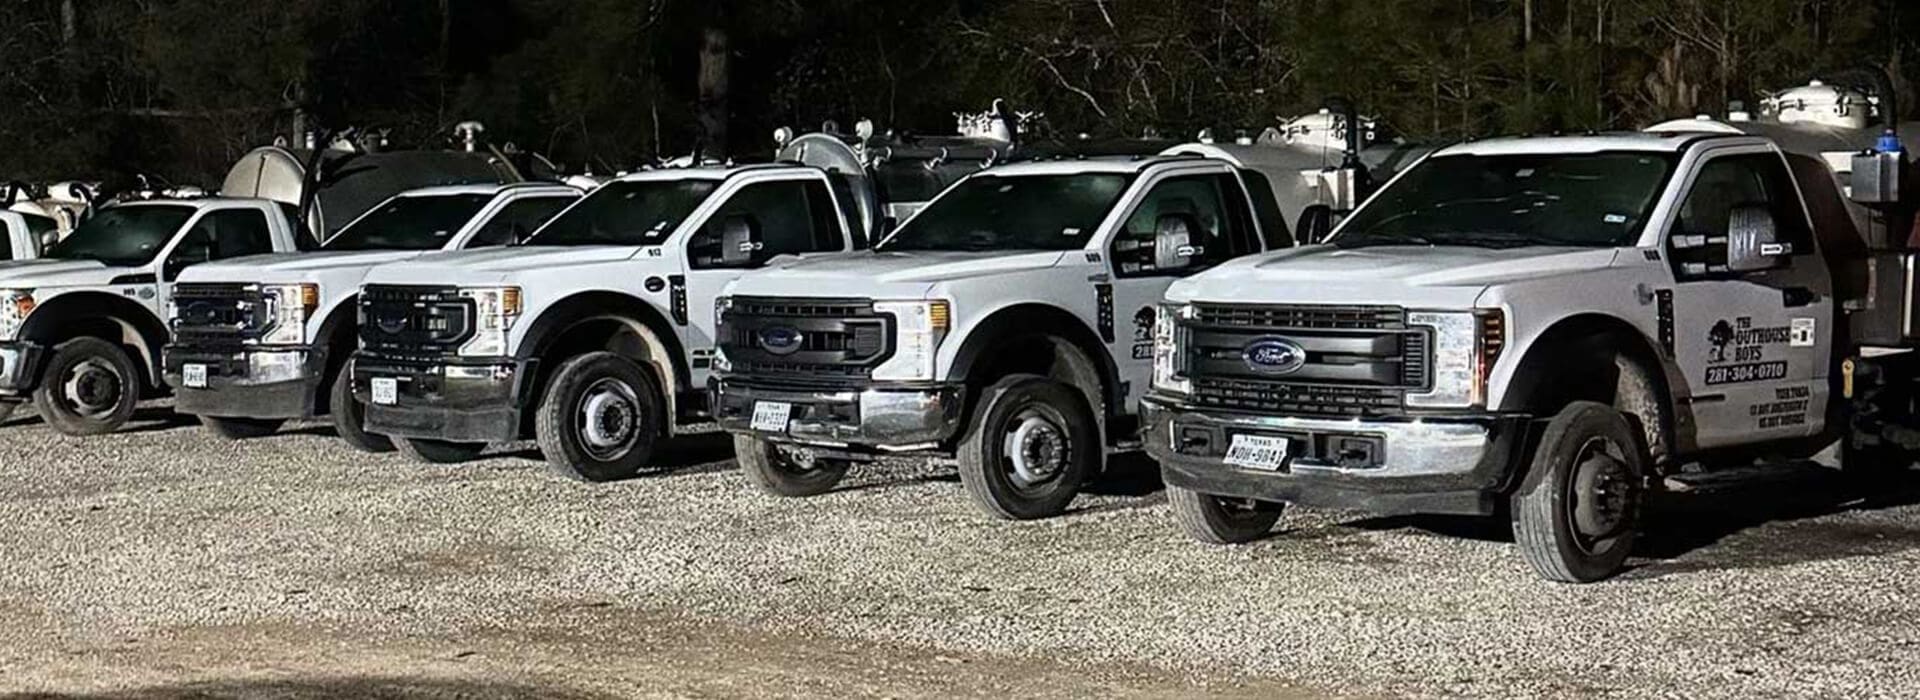 A row of white trucks parked in the dirt.